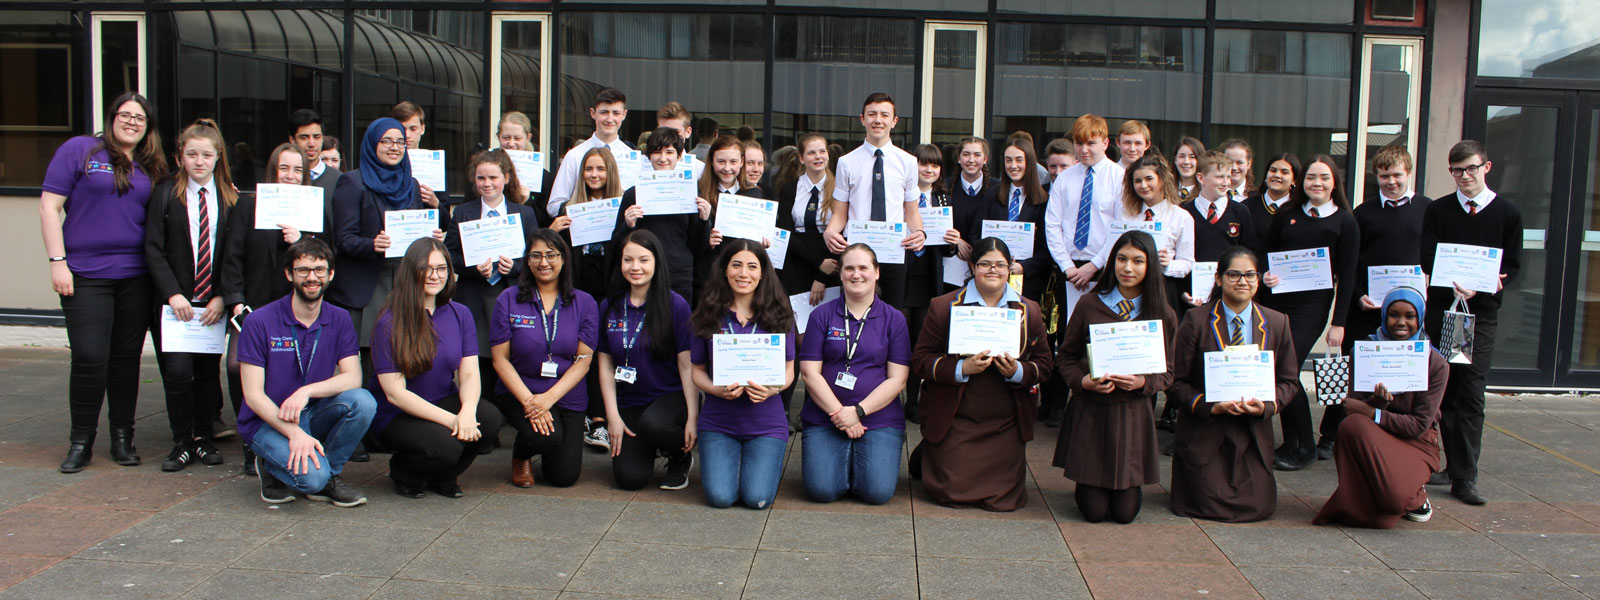 Young Chemical Ambassadors participants hold their certificates and smile for the camera